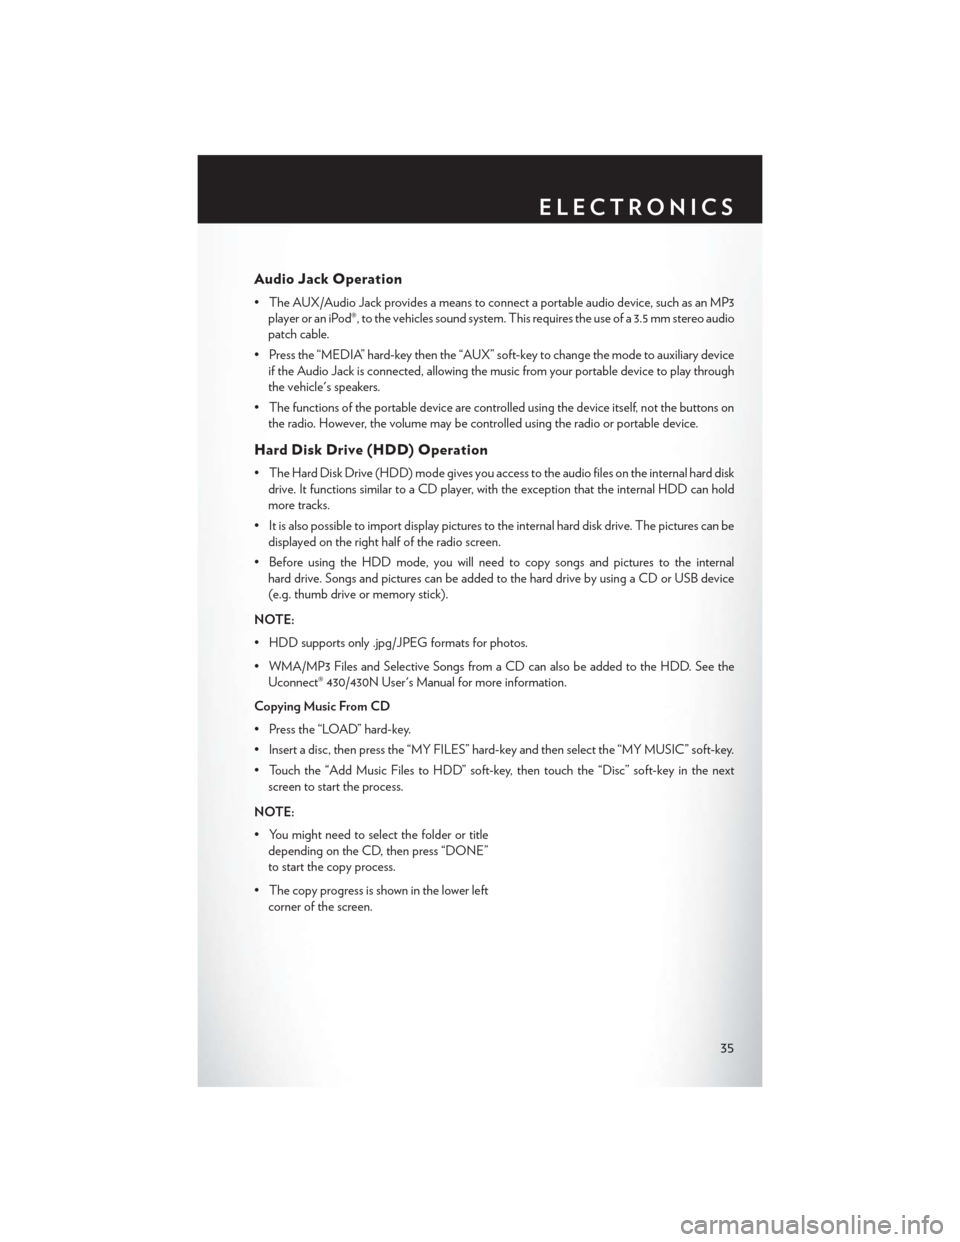 CHRYSLER 200 2013 1.G Owners Guide Audio Jack Operation
• The AUX/Audio Jack provides a means to connect a portable audio device, such as an MP3player or an iPod®, to the vehicles sound system. This requires the use of a 3.5 mm ster